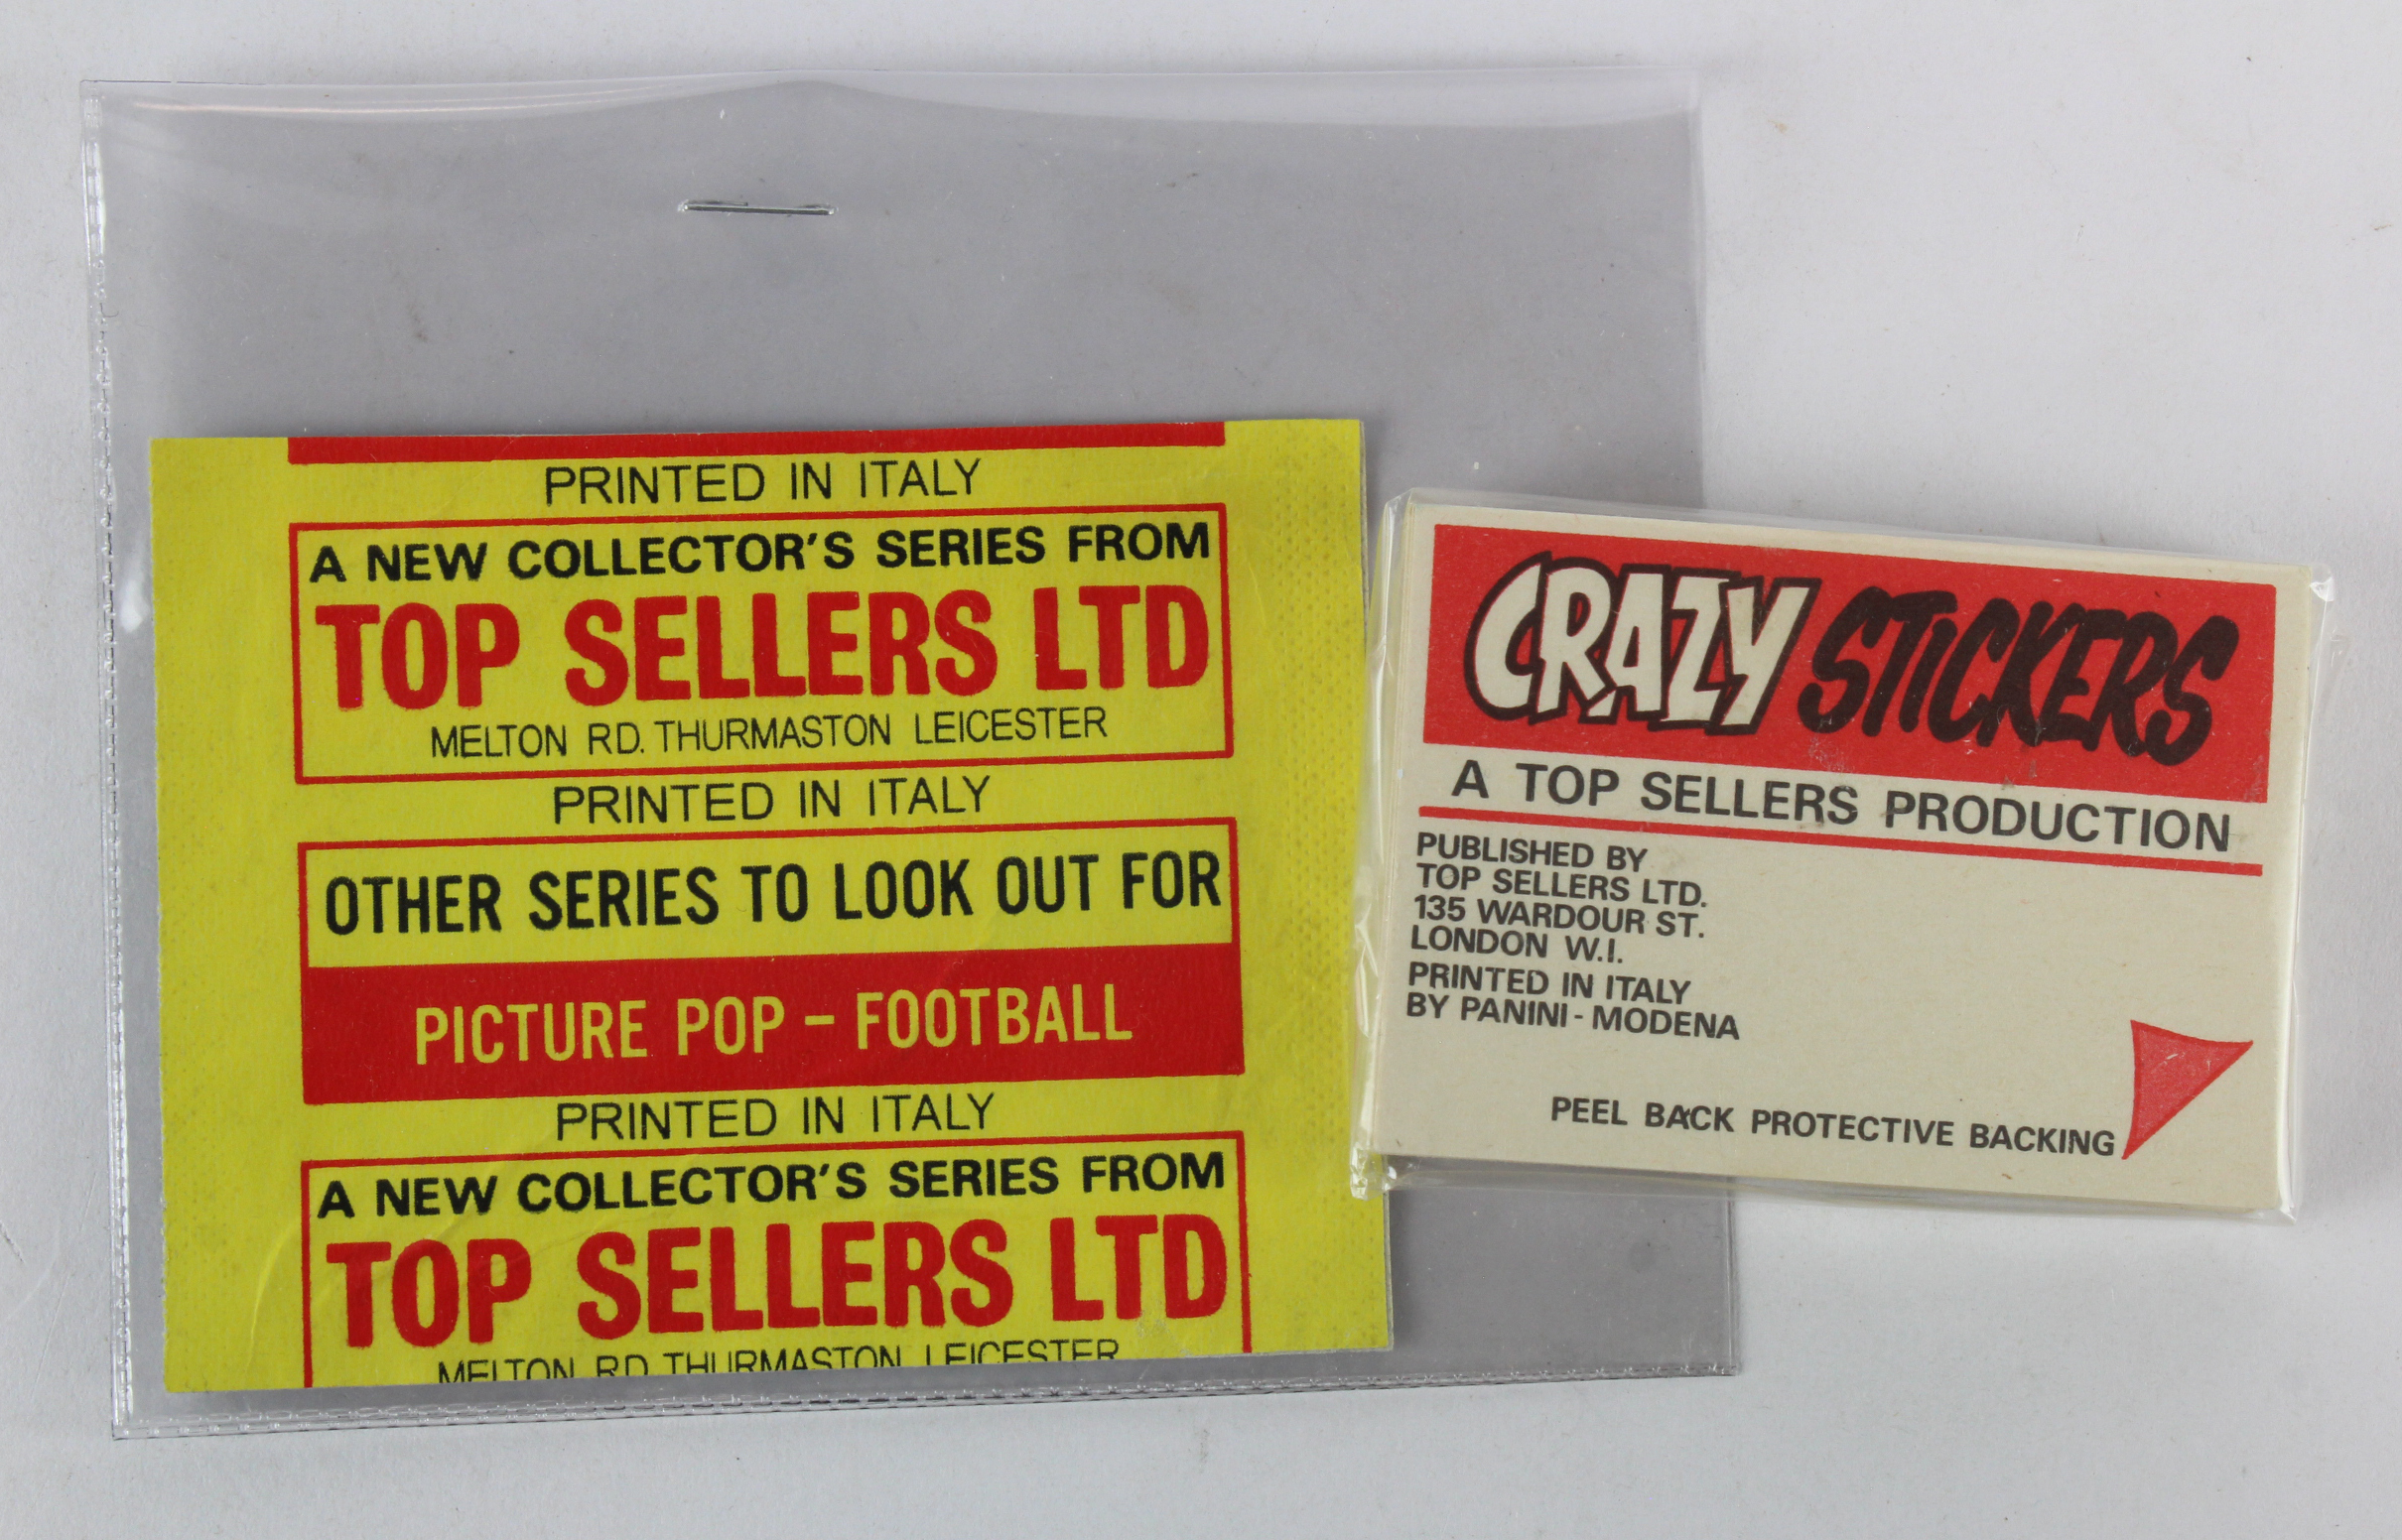 Panini / Top Sellers Crazy Stickers set, with an original wrapper